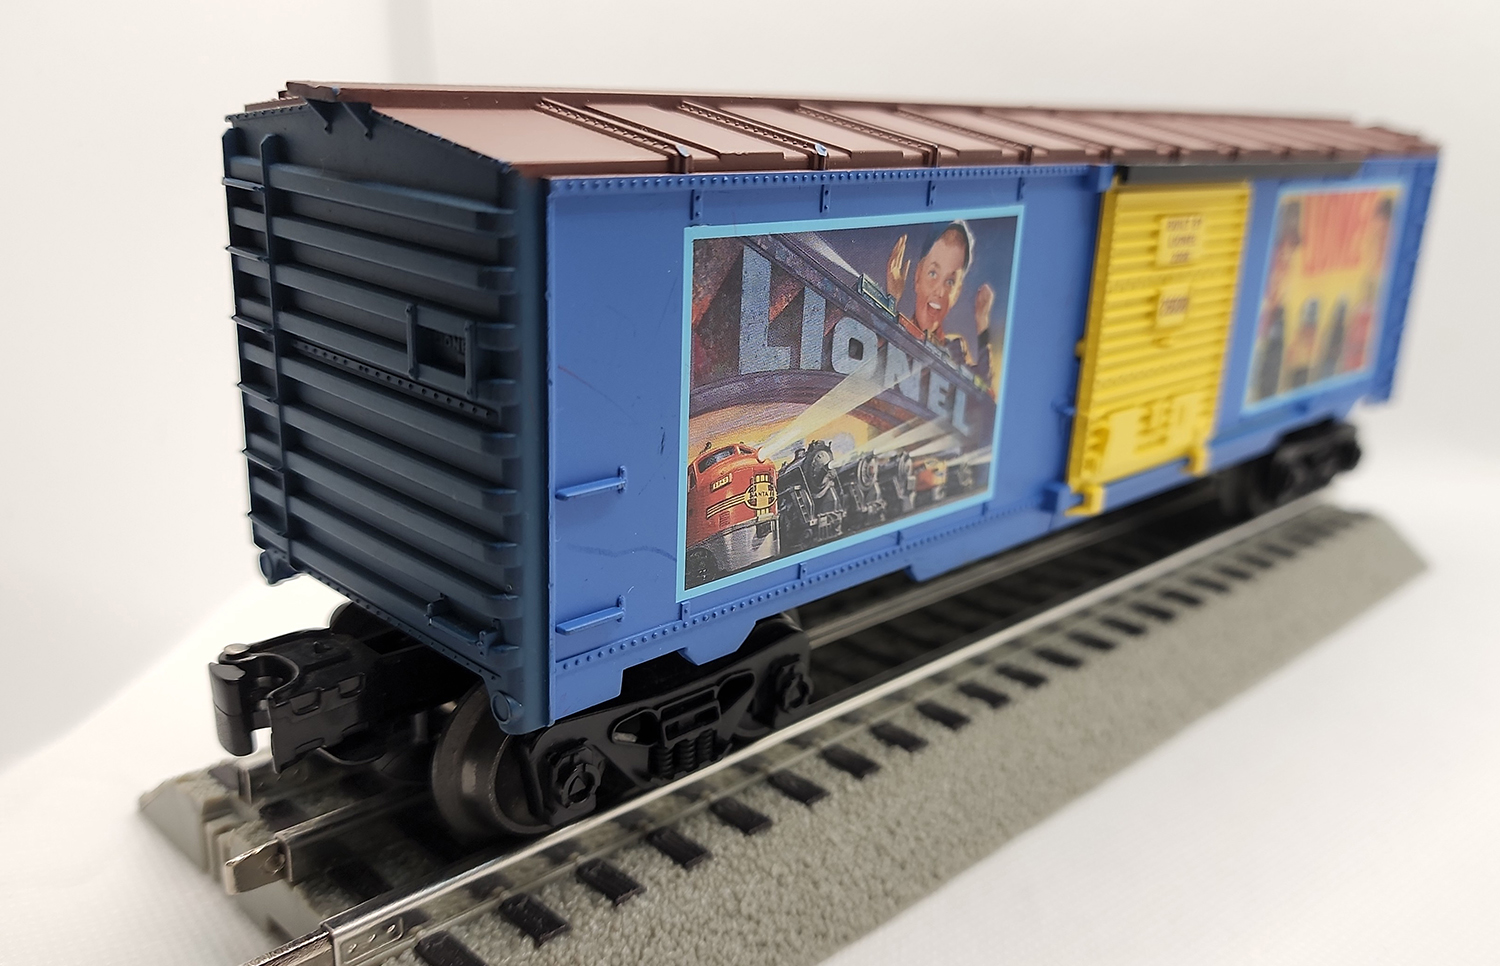 4th view of the Lionel 2006 Billboard Car #25030 in my O-scale Collection